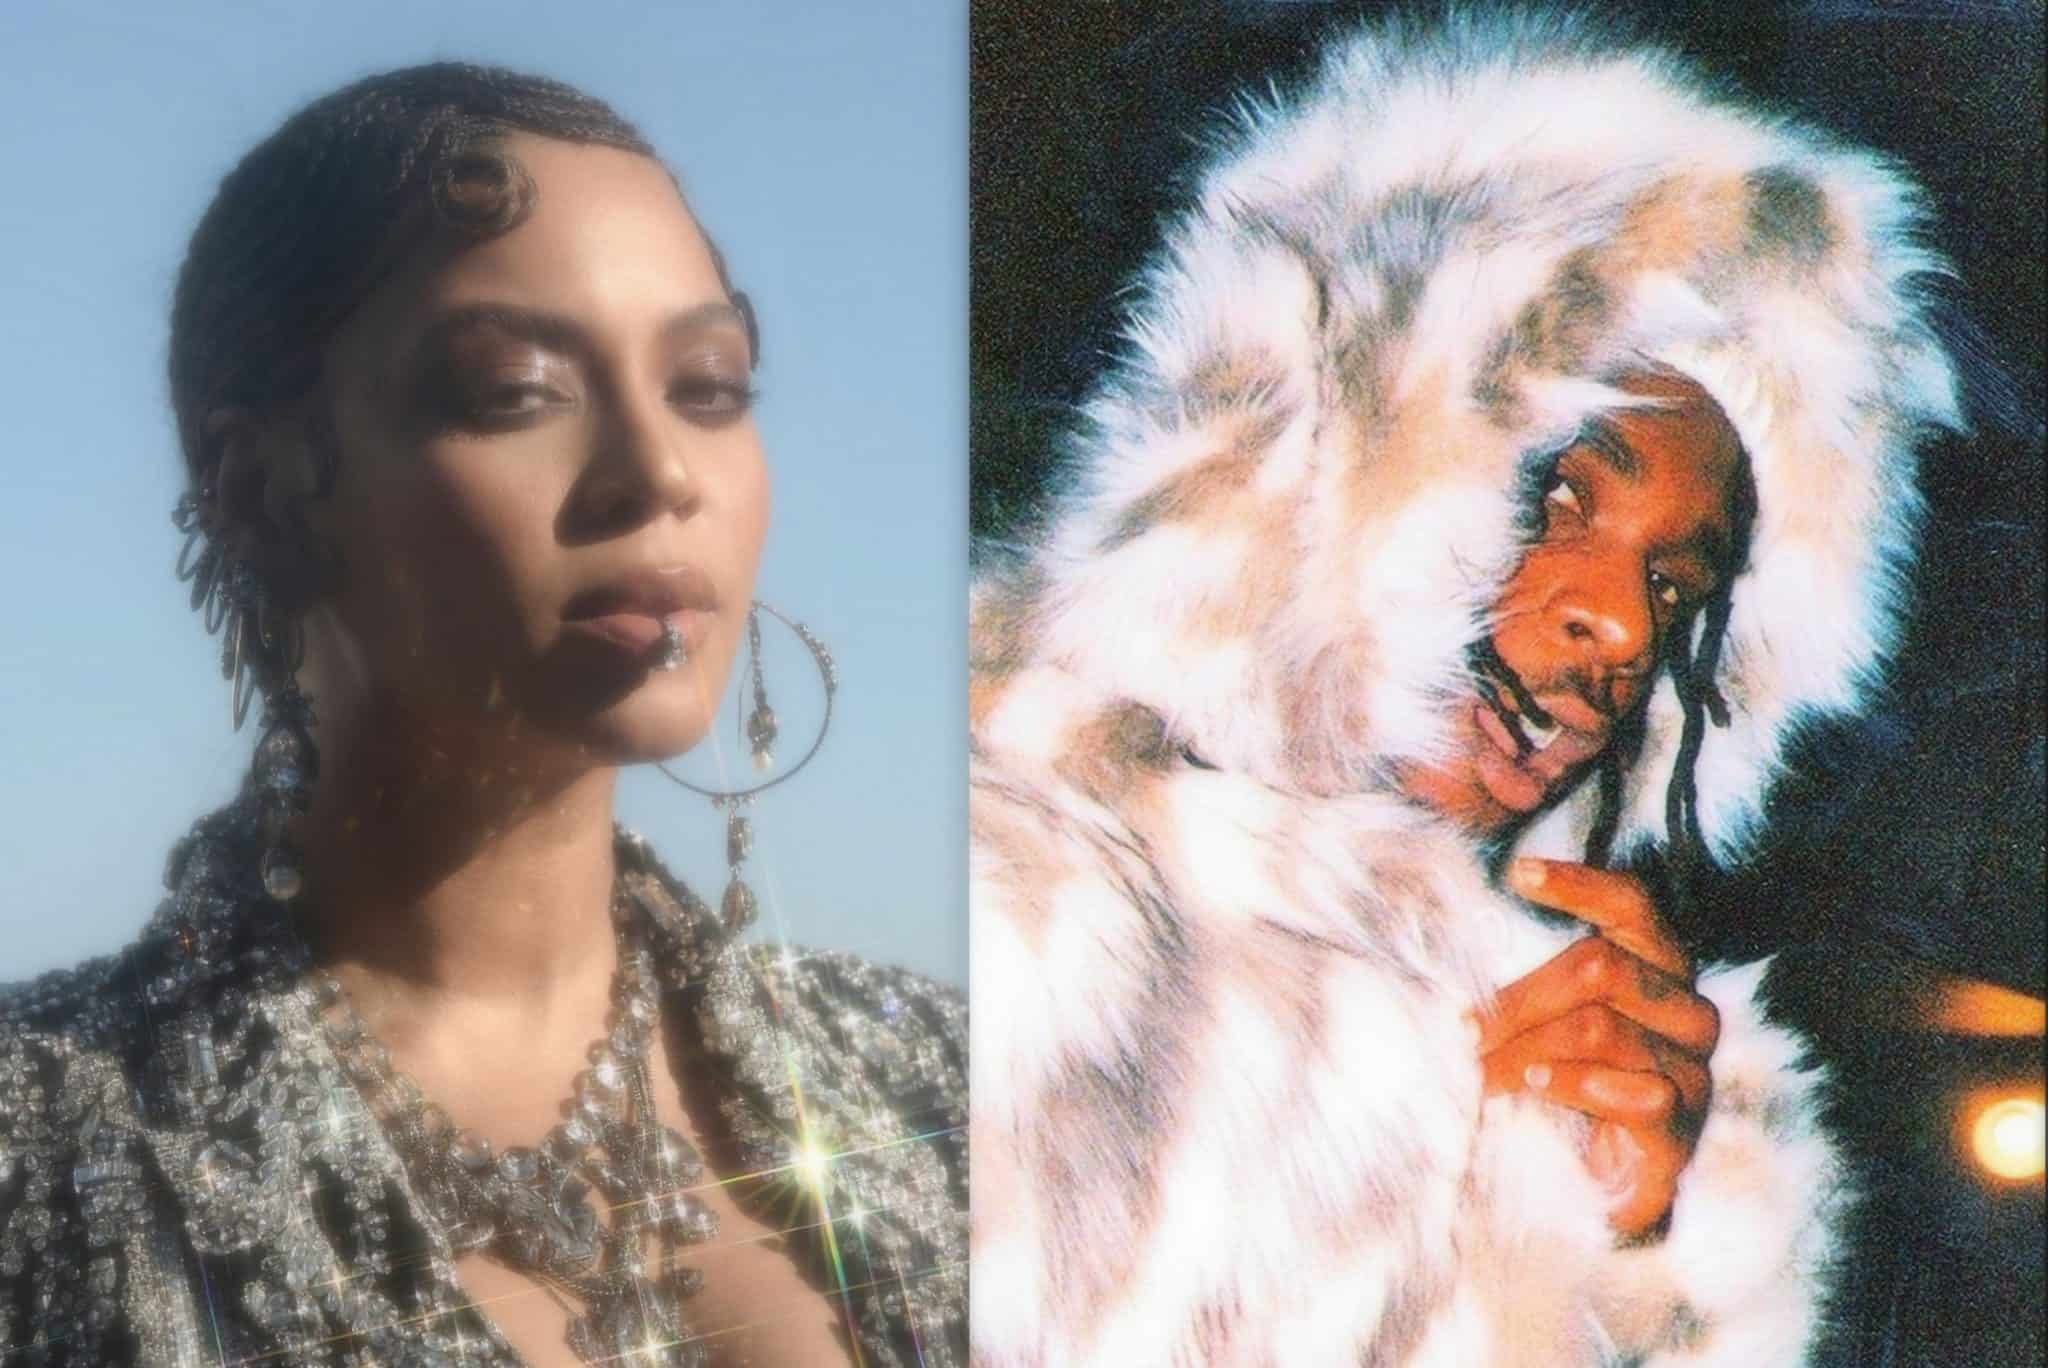 Best New Music Special: “Brown Skin Girl” by Beyoncé + “Collateral Damage” By Burna Boy”